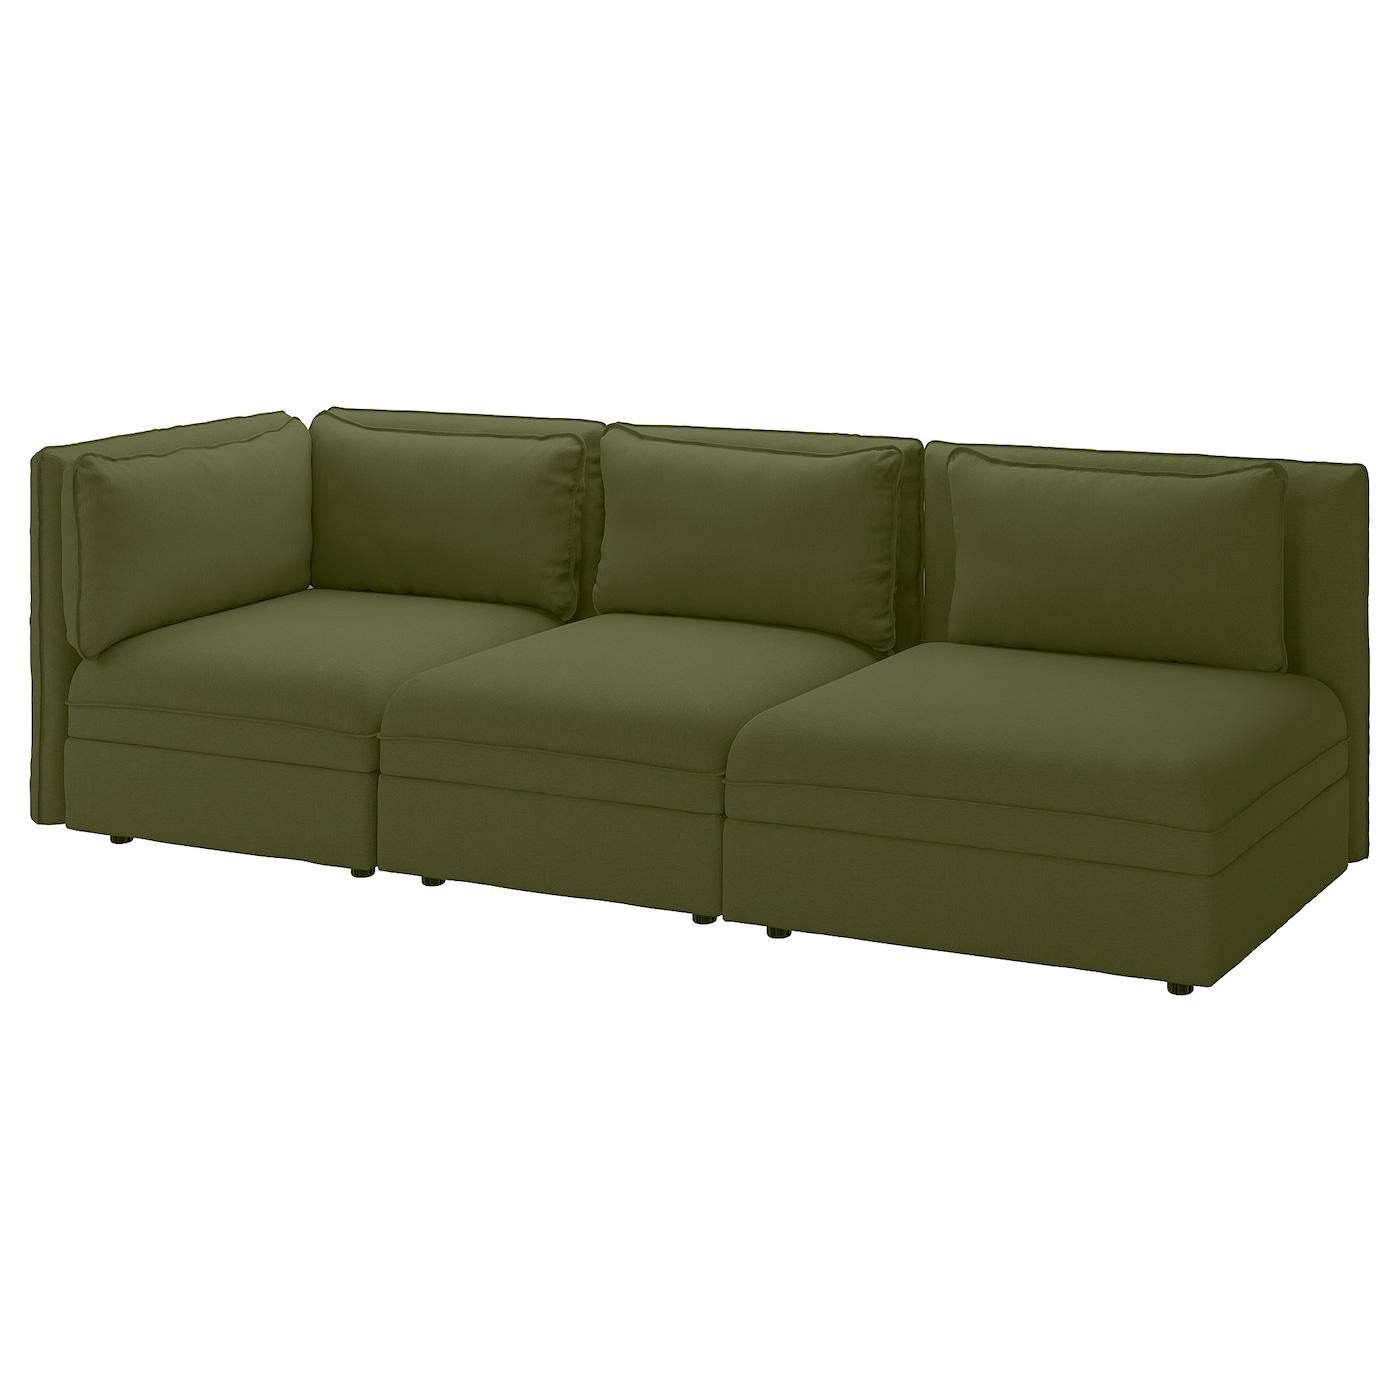 3 Seat Modular Sofa With Sofa Bed Vallentuna With Open End Orrsta Olive Green for dimensions 1400 X 1400